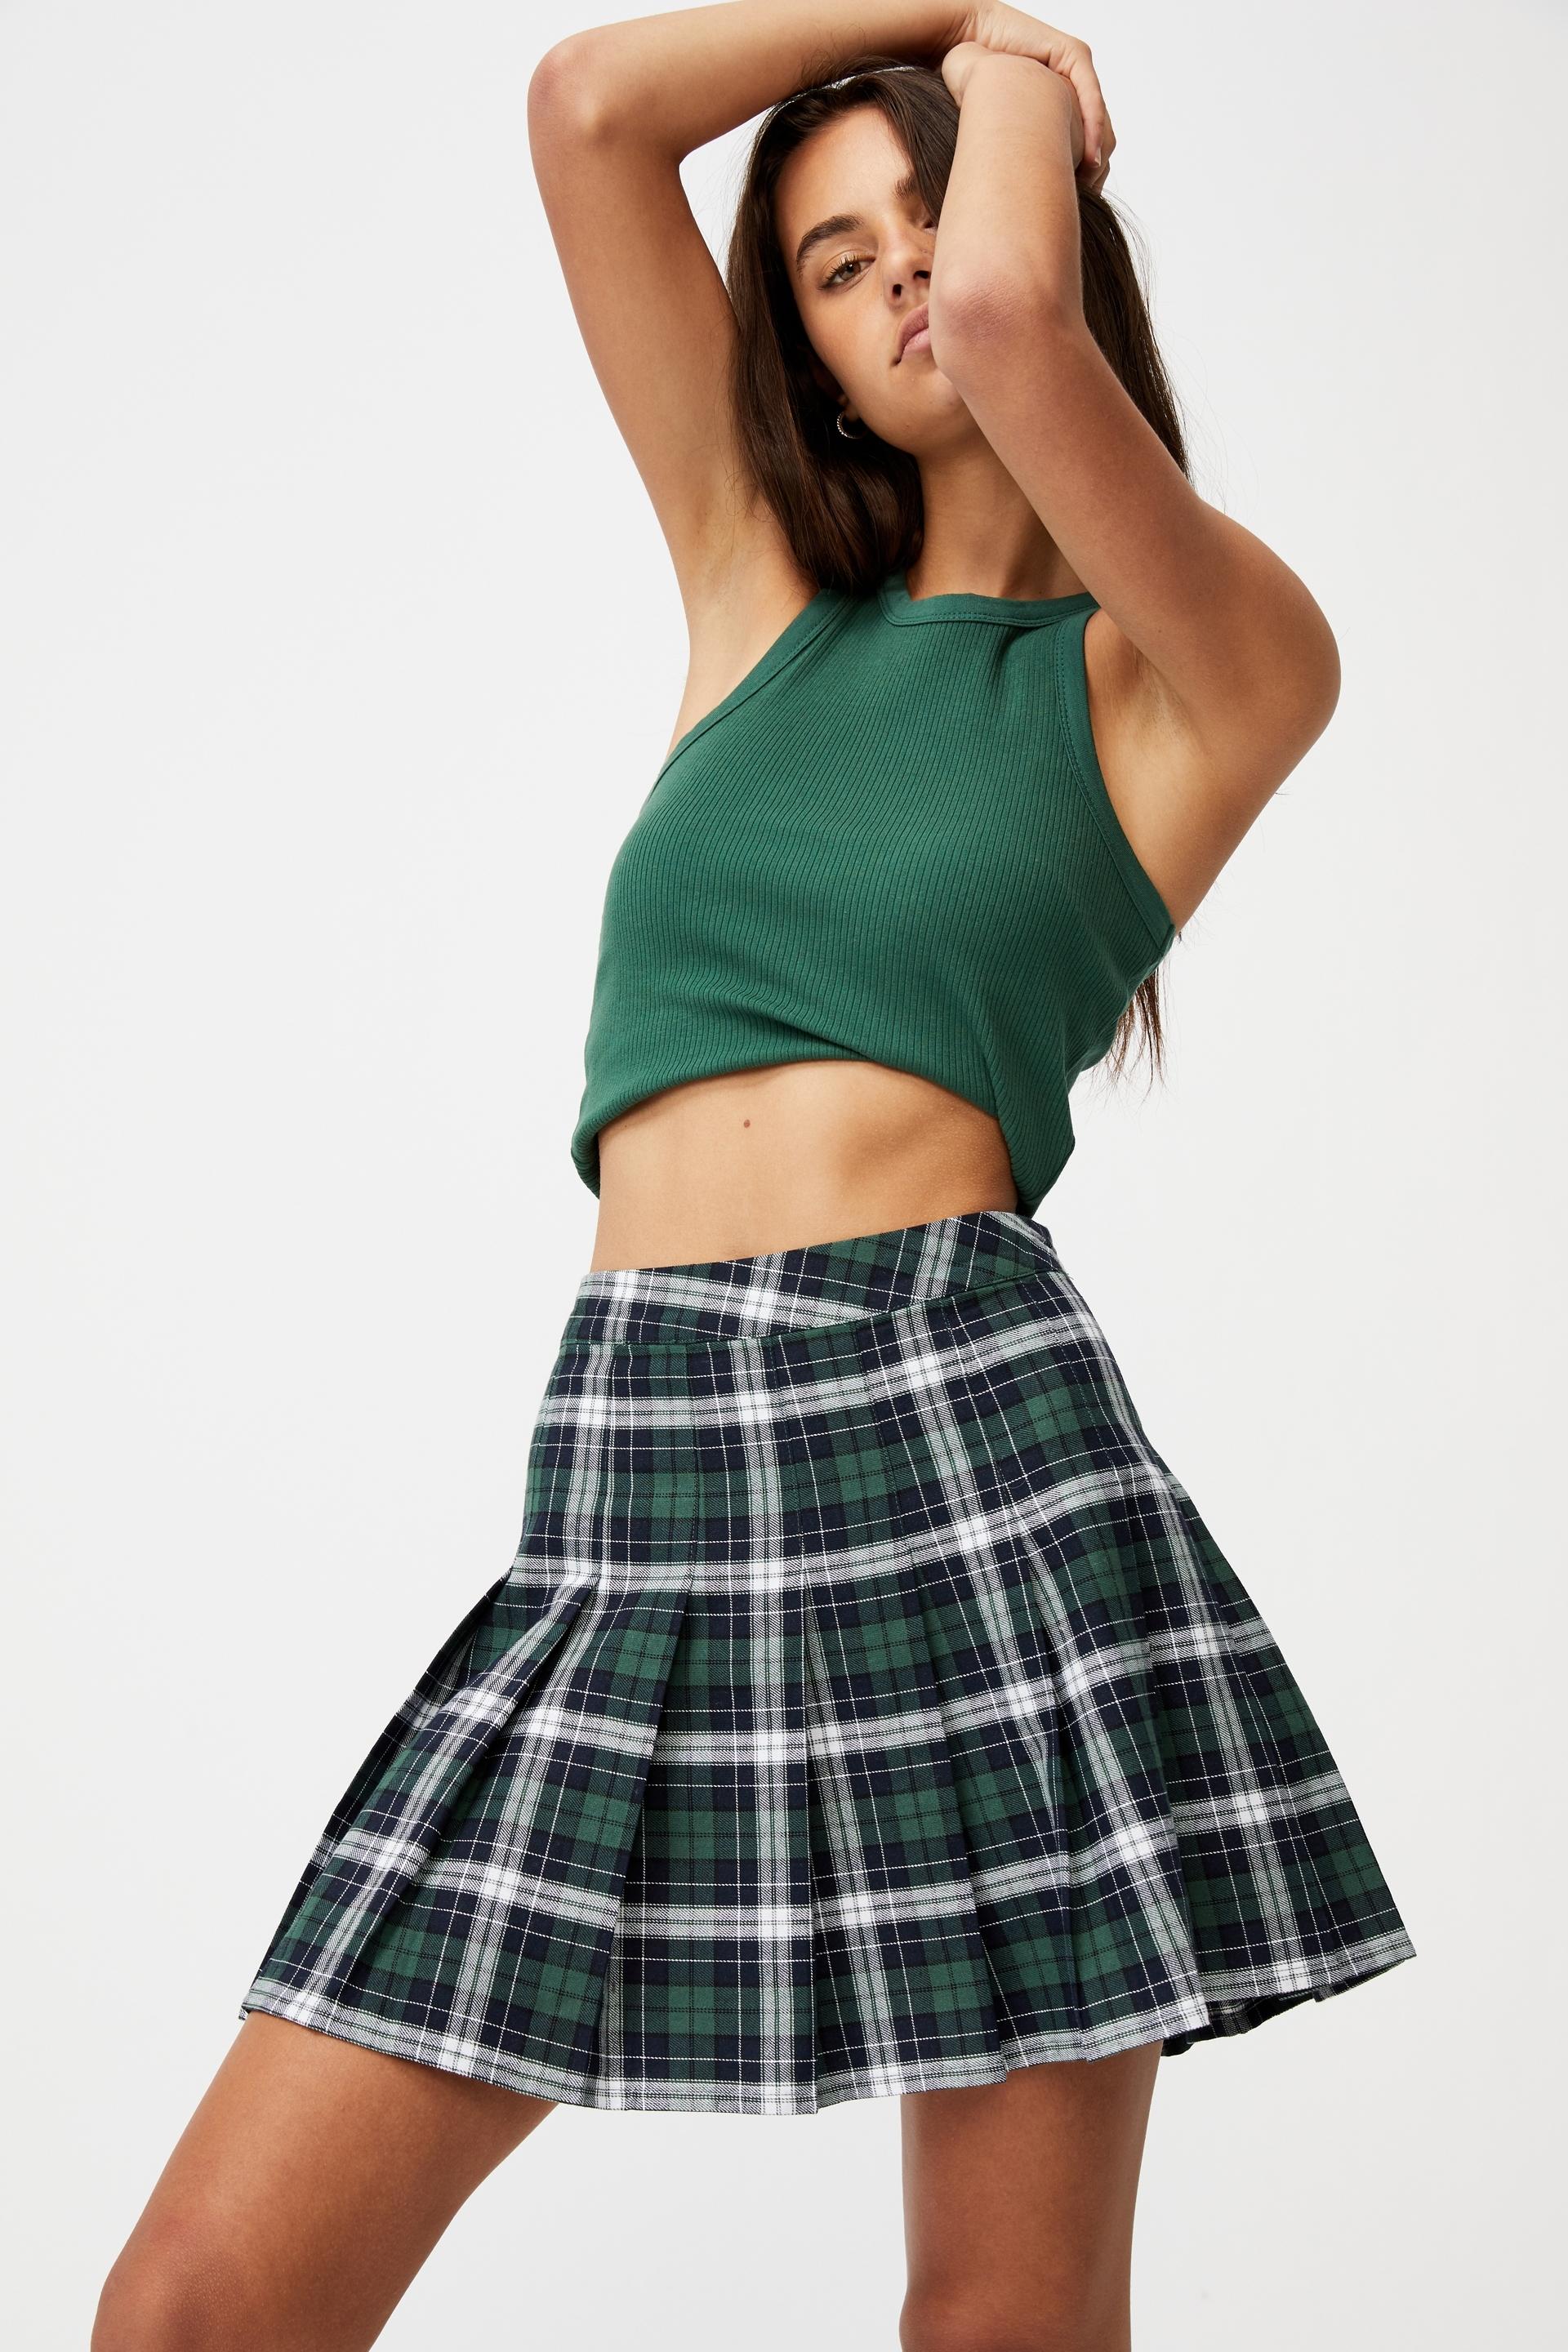 Pleated skirt - college check green Factorie Skirts | Superbalist.com